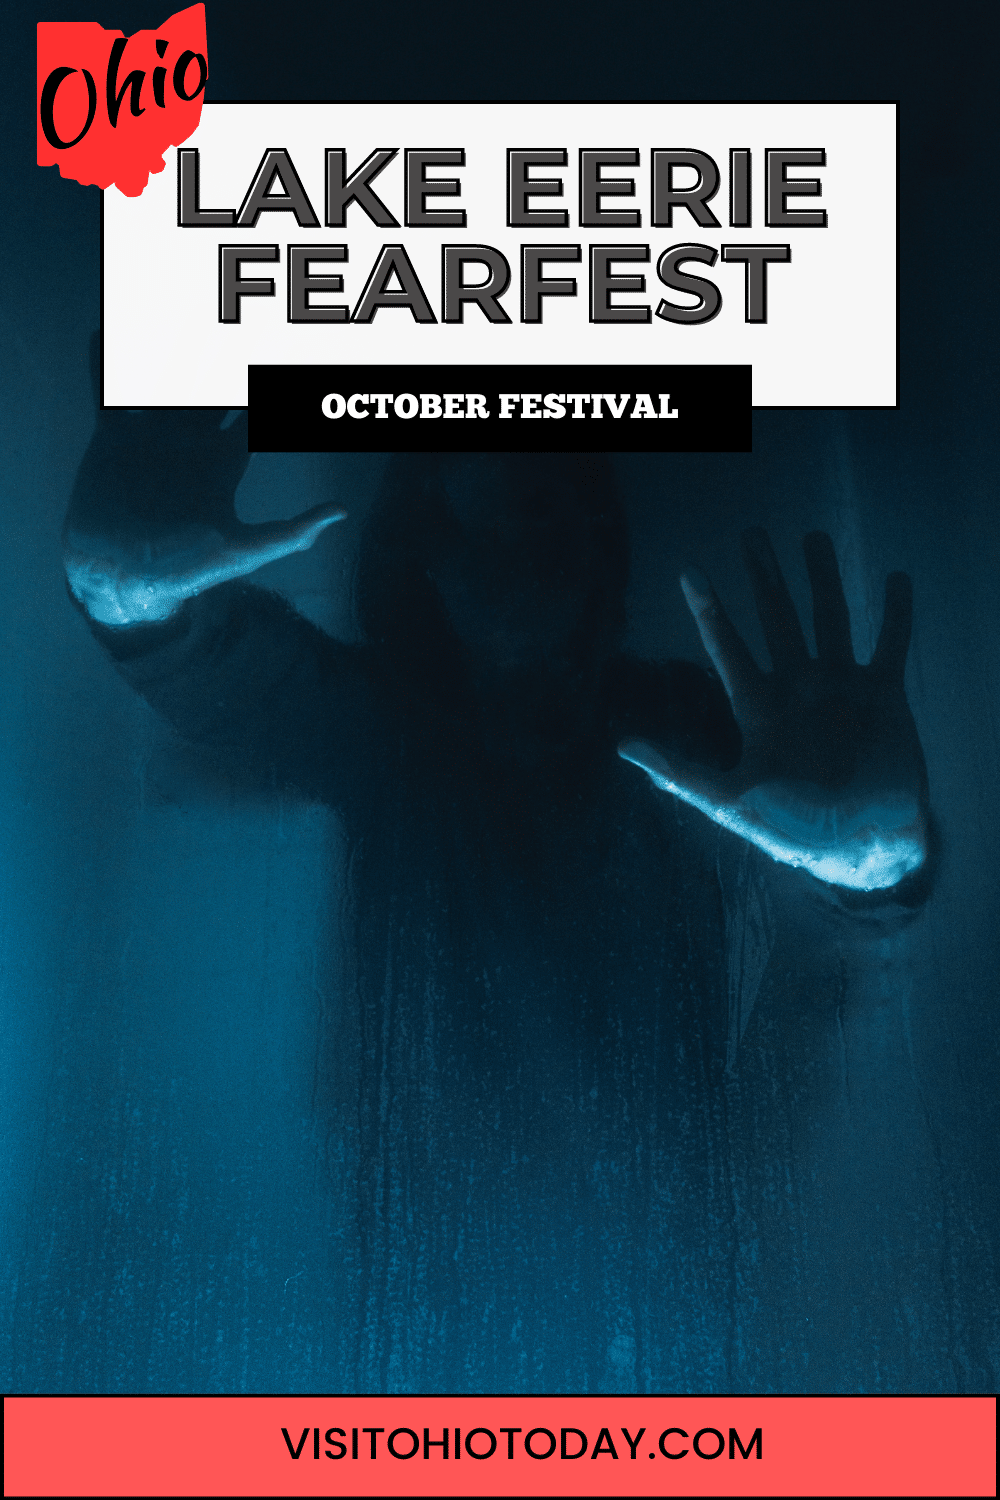 Be prepared to be very frightened! The Lake Eerie Fearfest at Ghostly Manor Thrill Center hosts this October festival, open each Friday and Saturday from 8pm to 11pm, starting on Friday September 30th and finishing on Saturday October 29th.